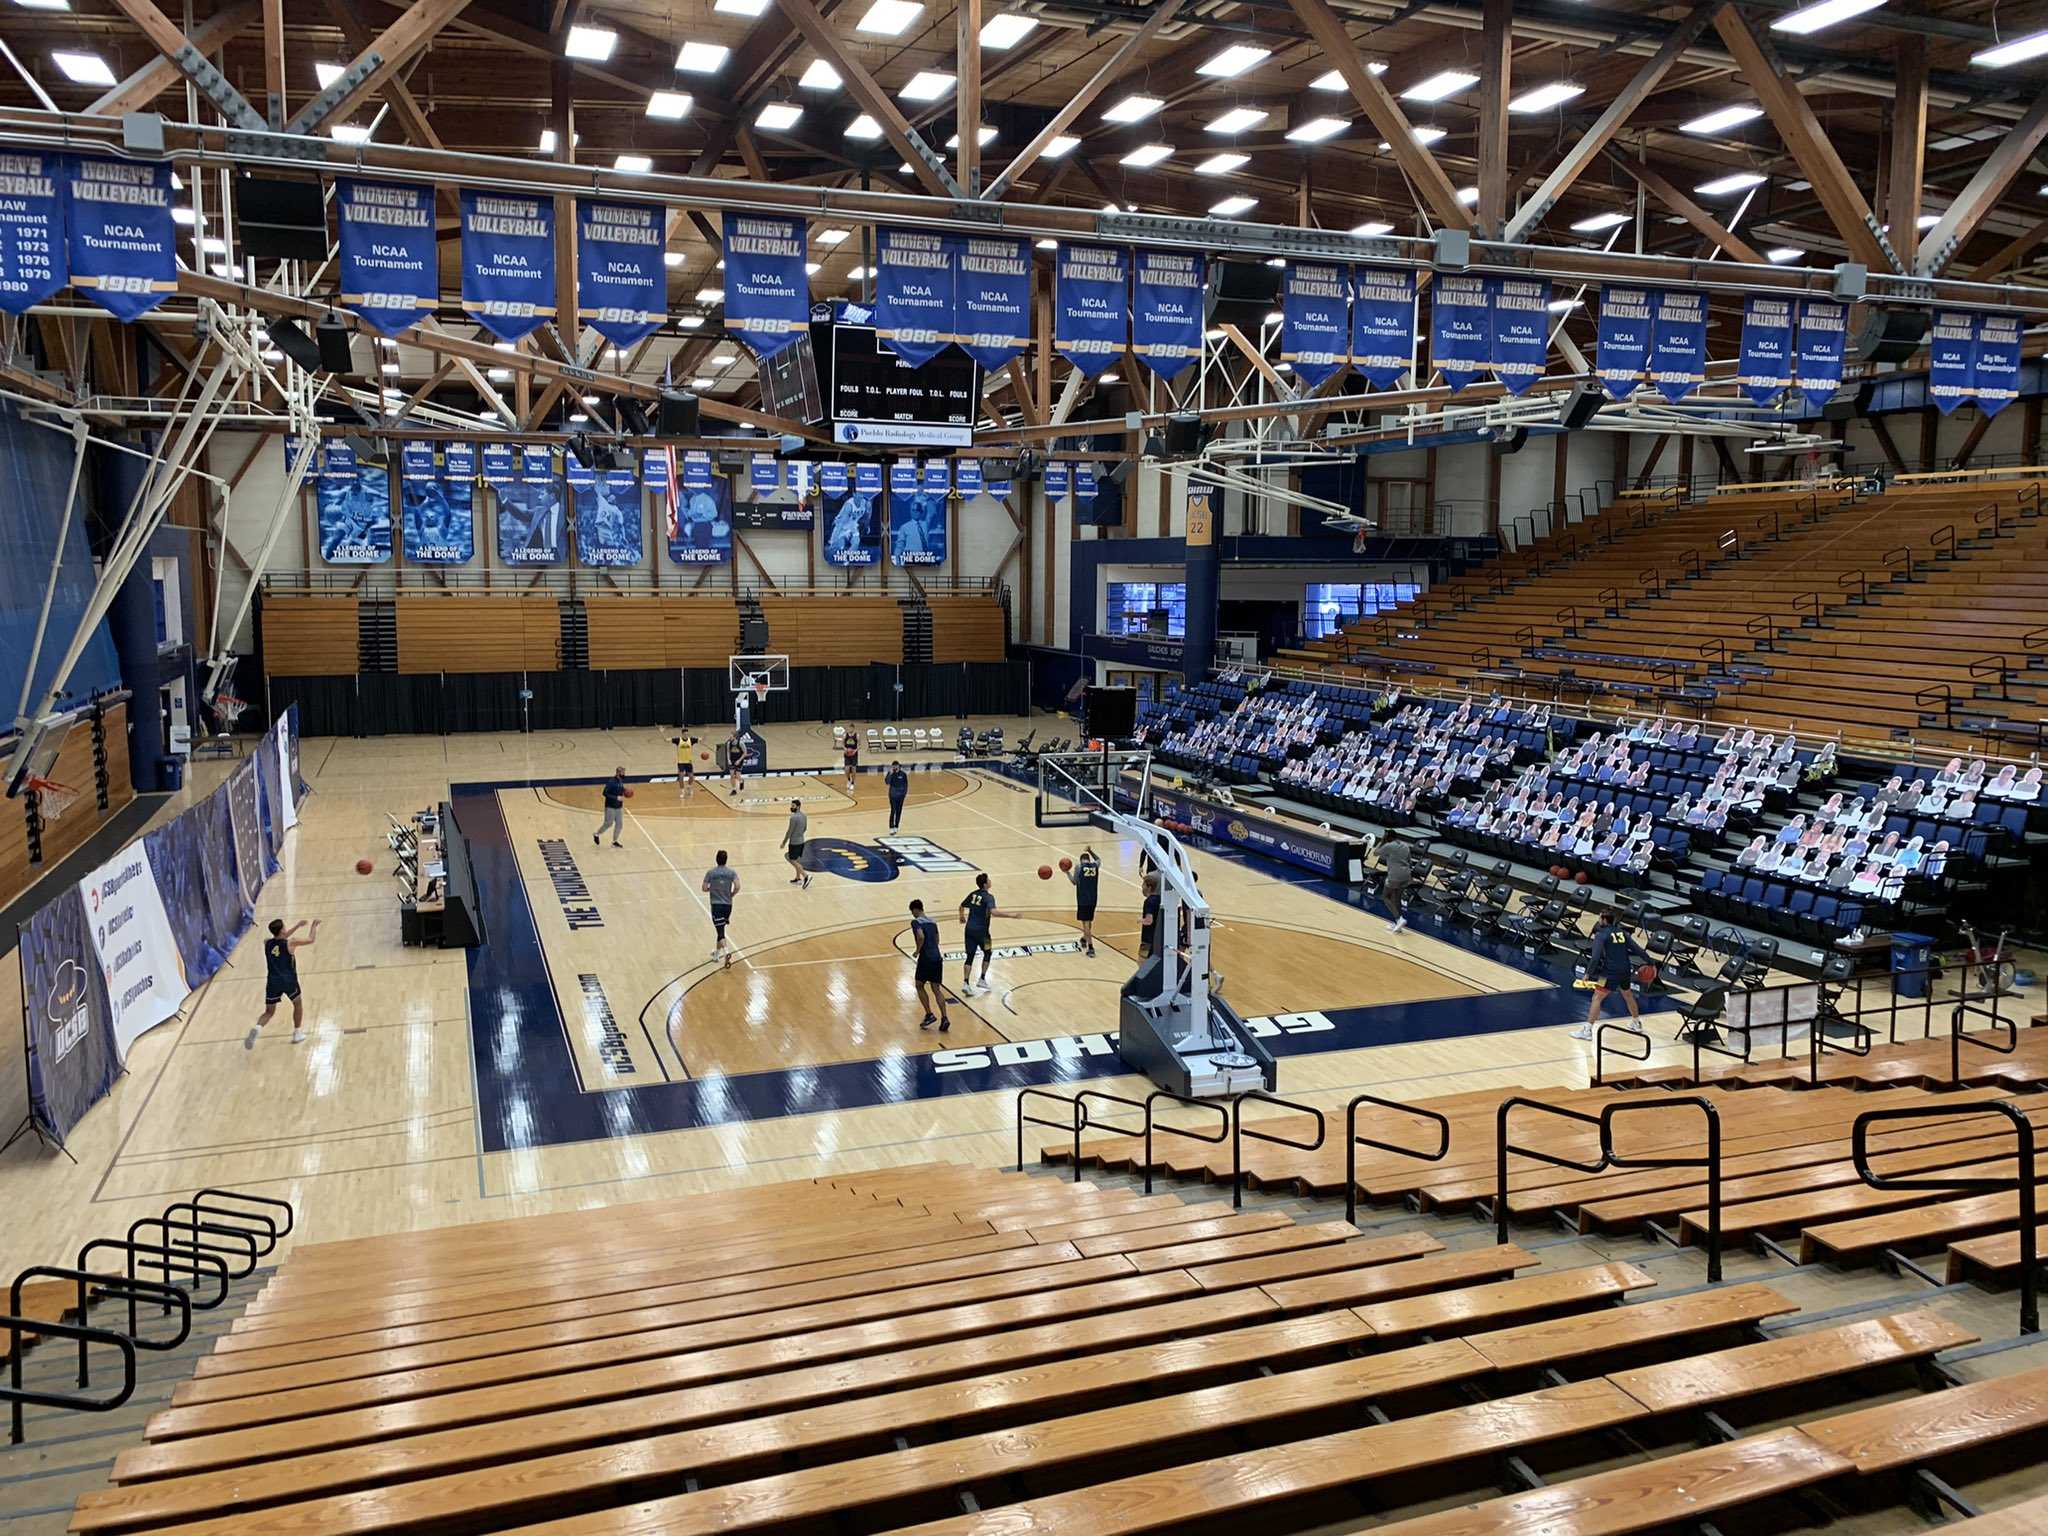 UCSD Men’s Basketball Swept in First Two Games of Big West Play